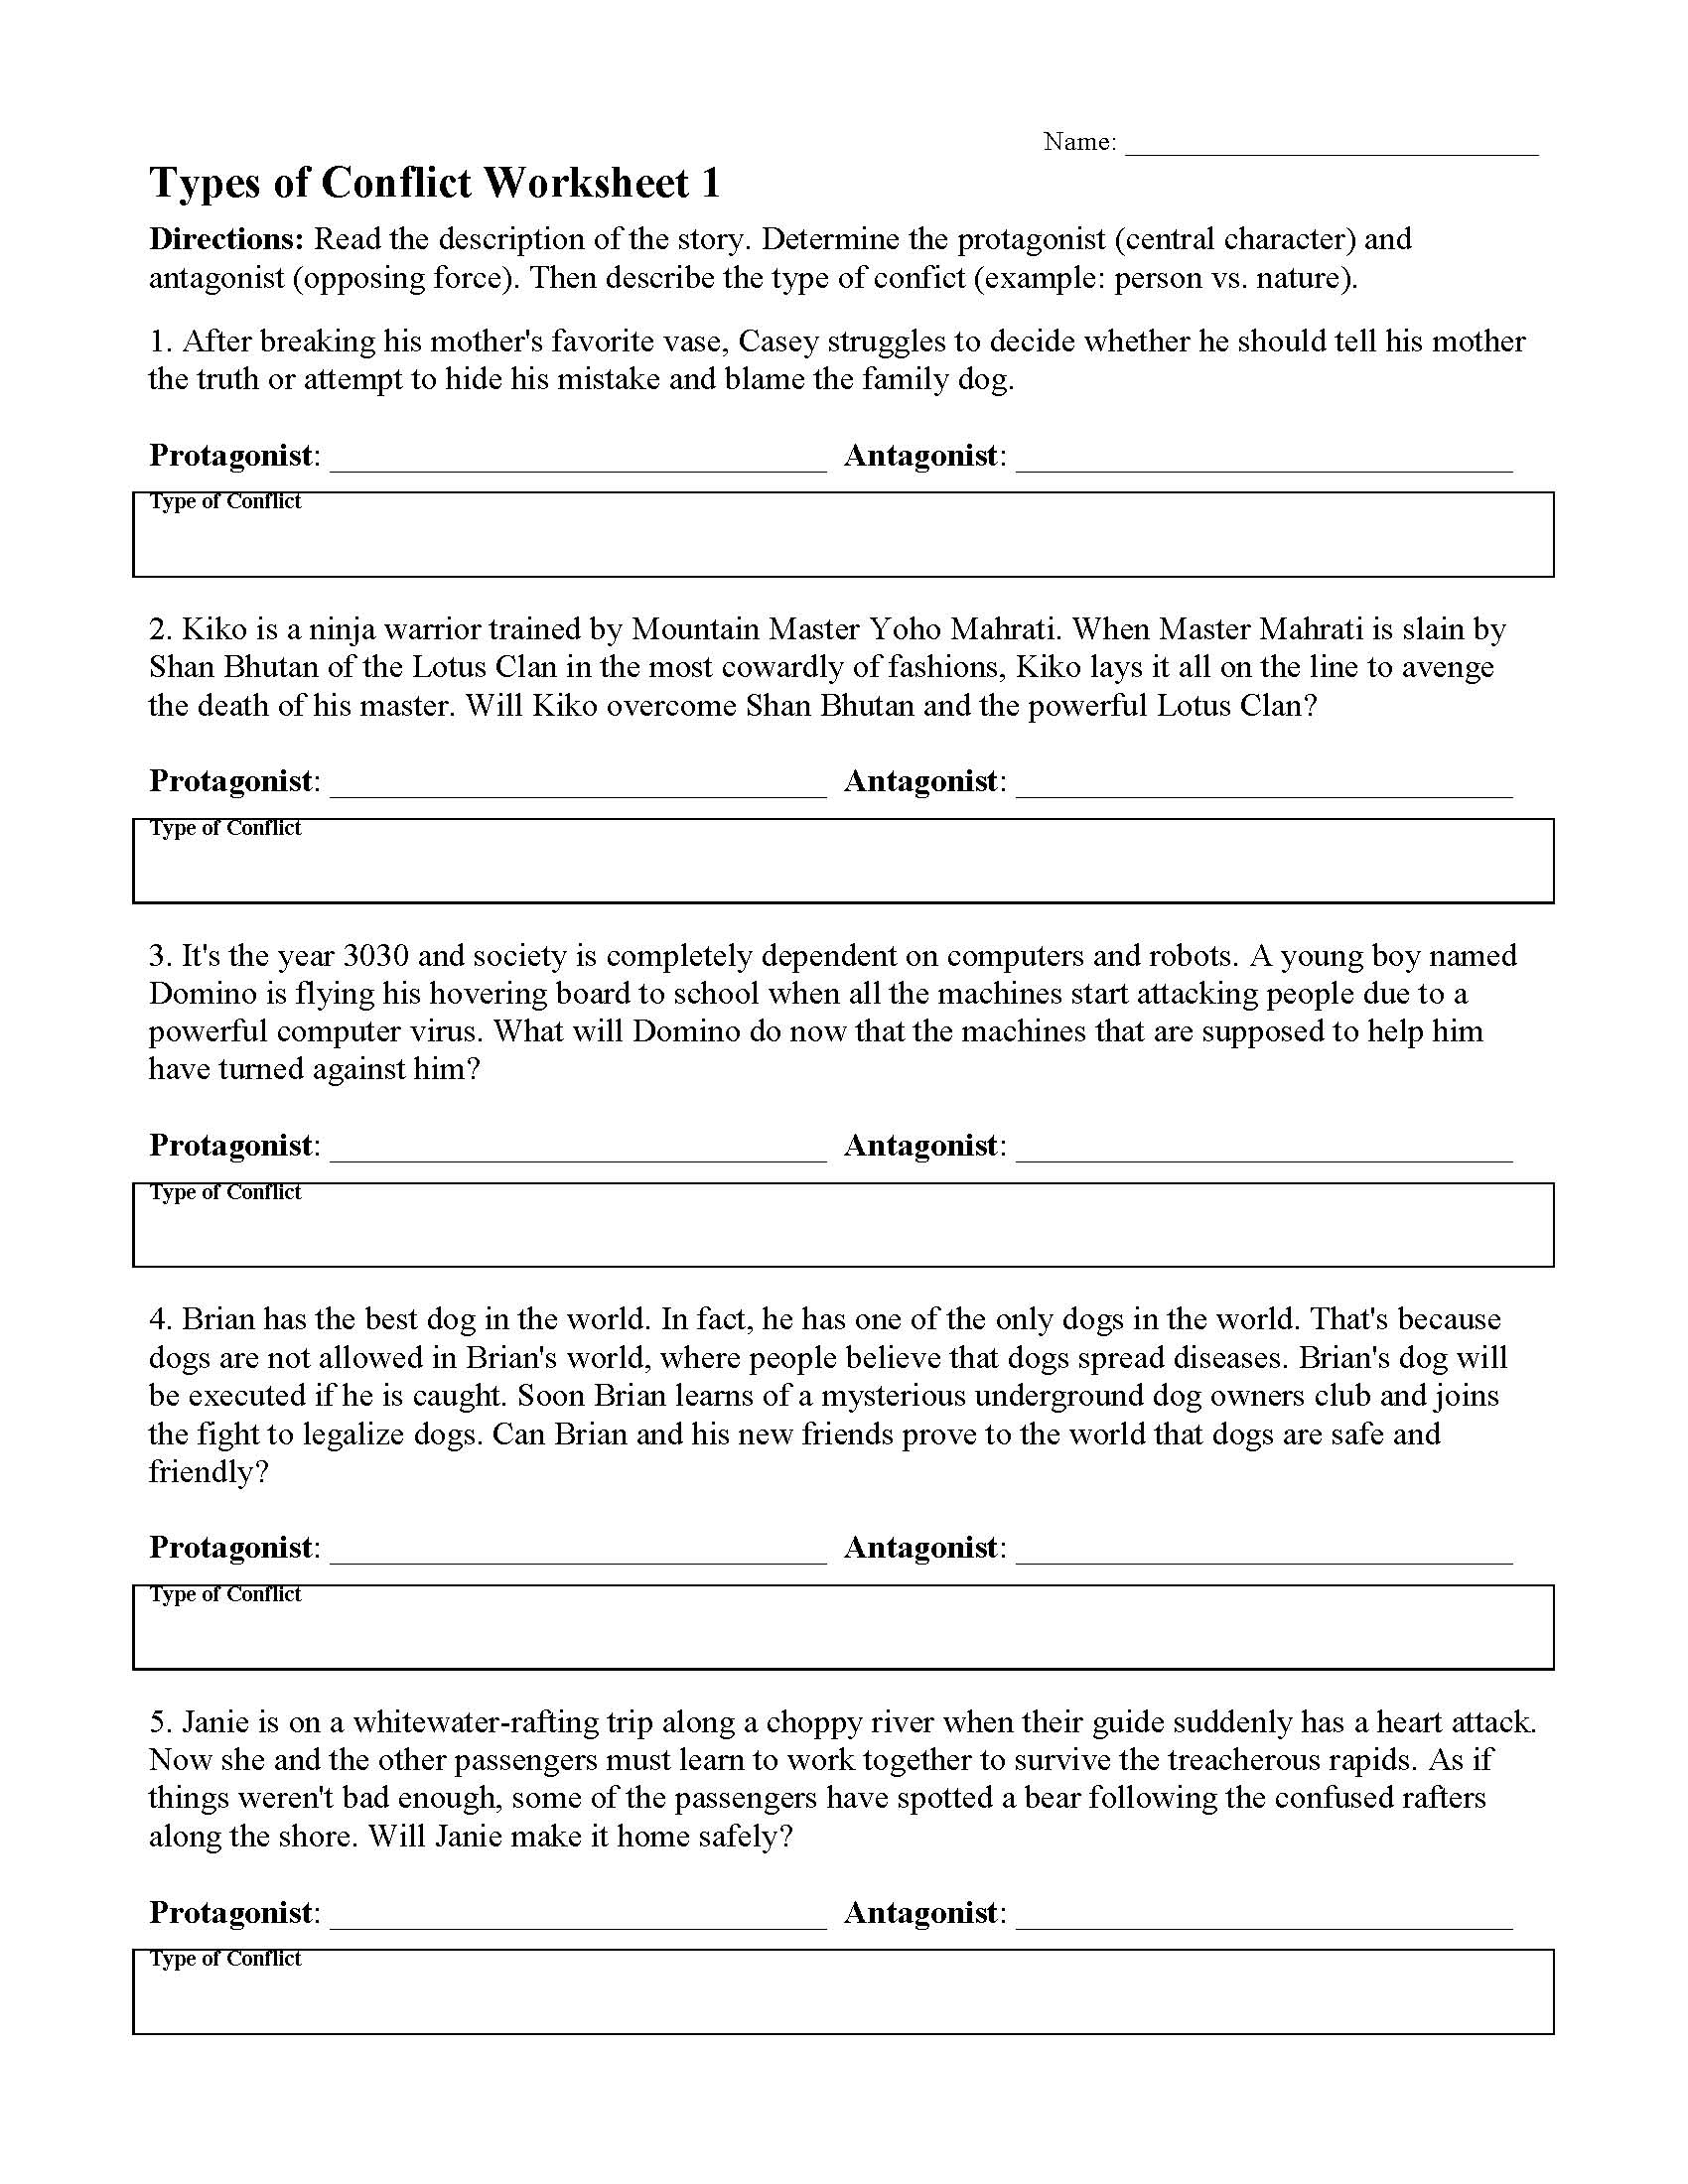 Types of Conflict Worksheet 11  Reading Activity Inside Types Of Conflict Worksheet